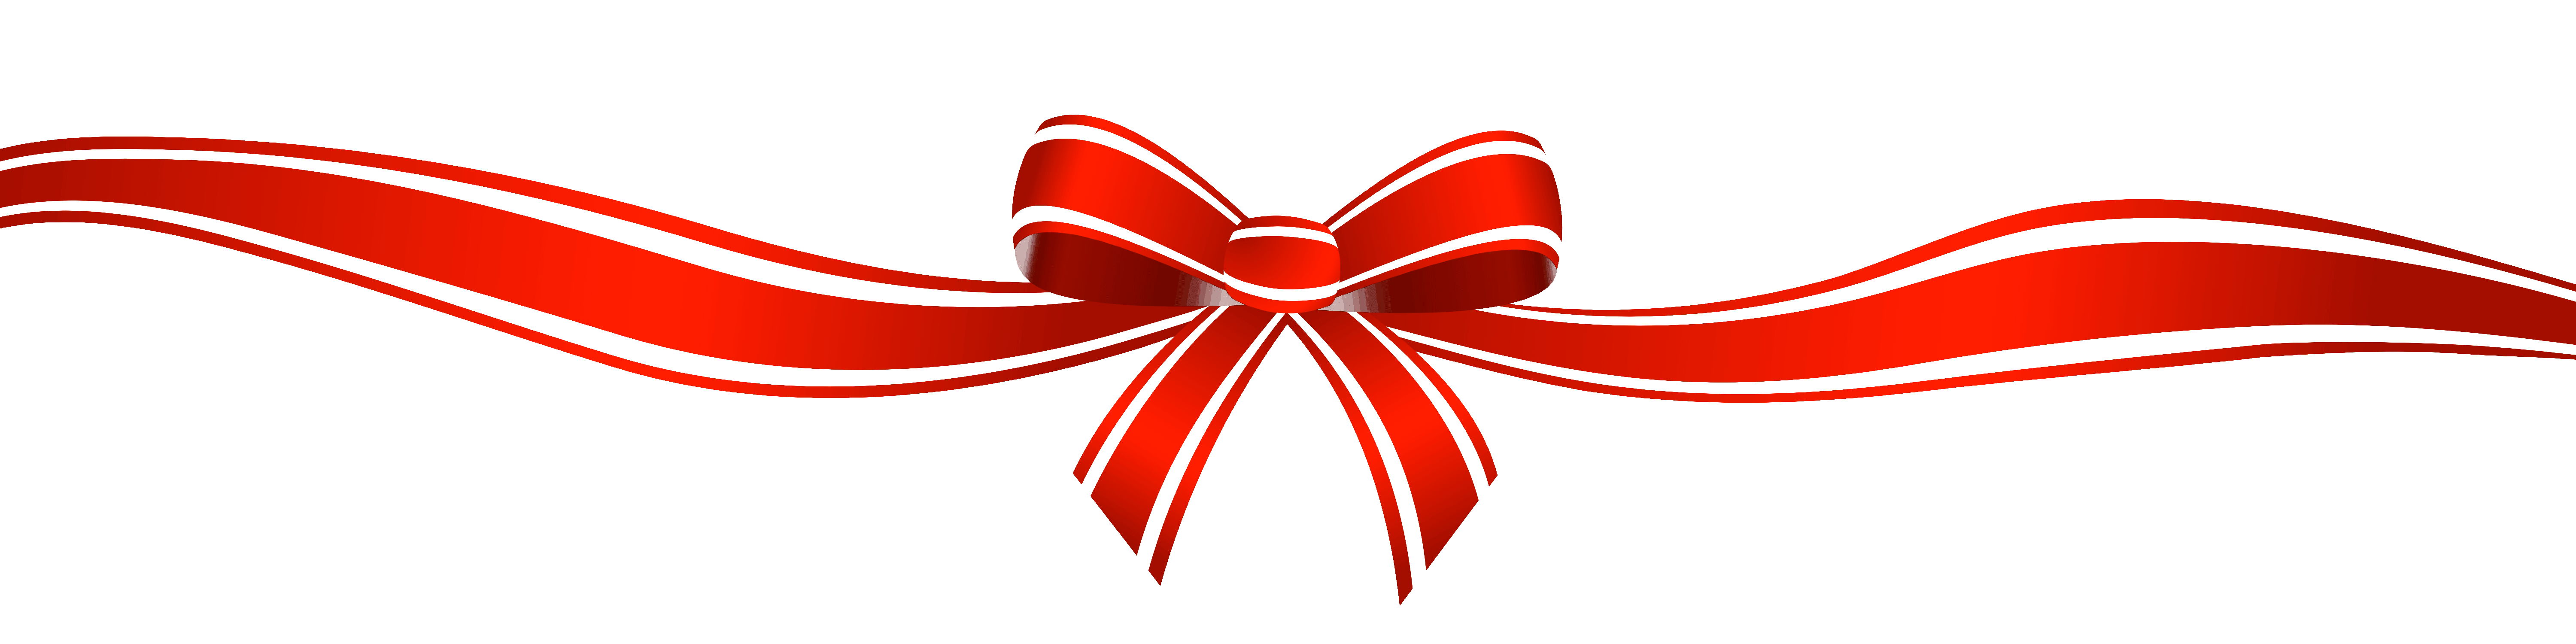 Red Bow with Long Strings PNG Image